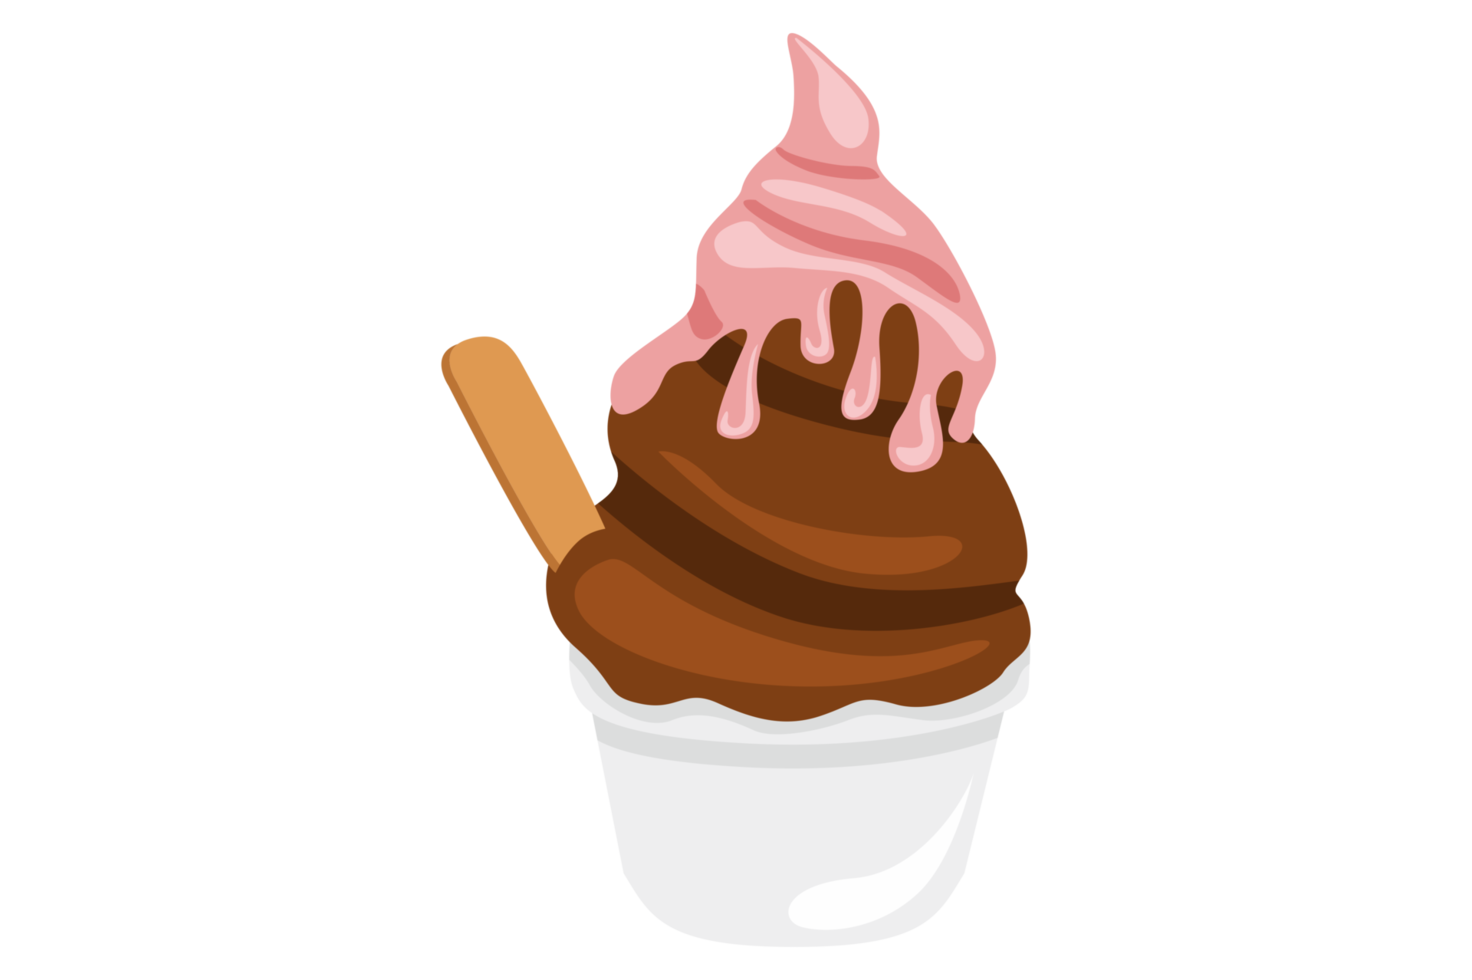 Chocolate Ice Cream Cup Melted Pink Chocolate On The Top png